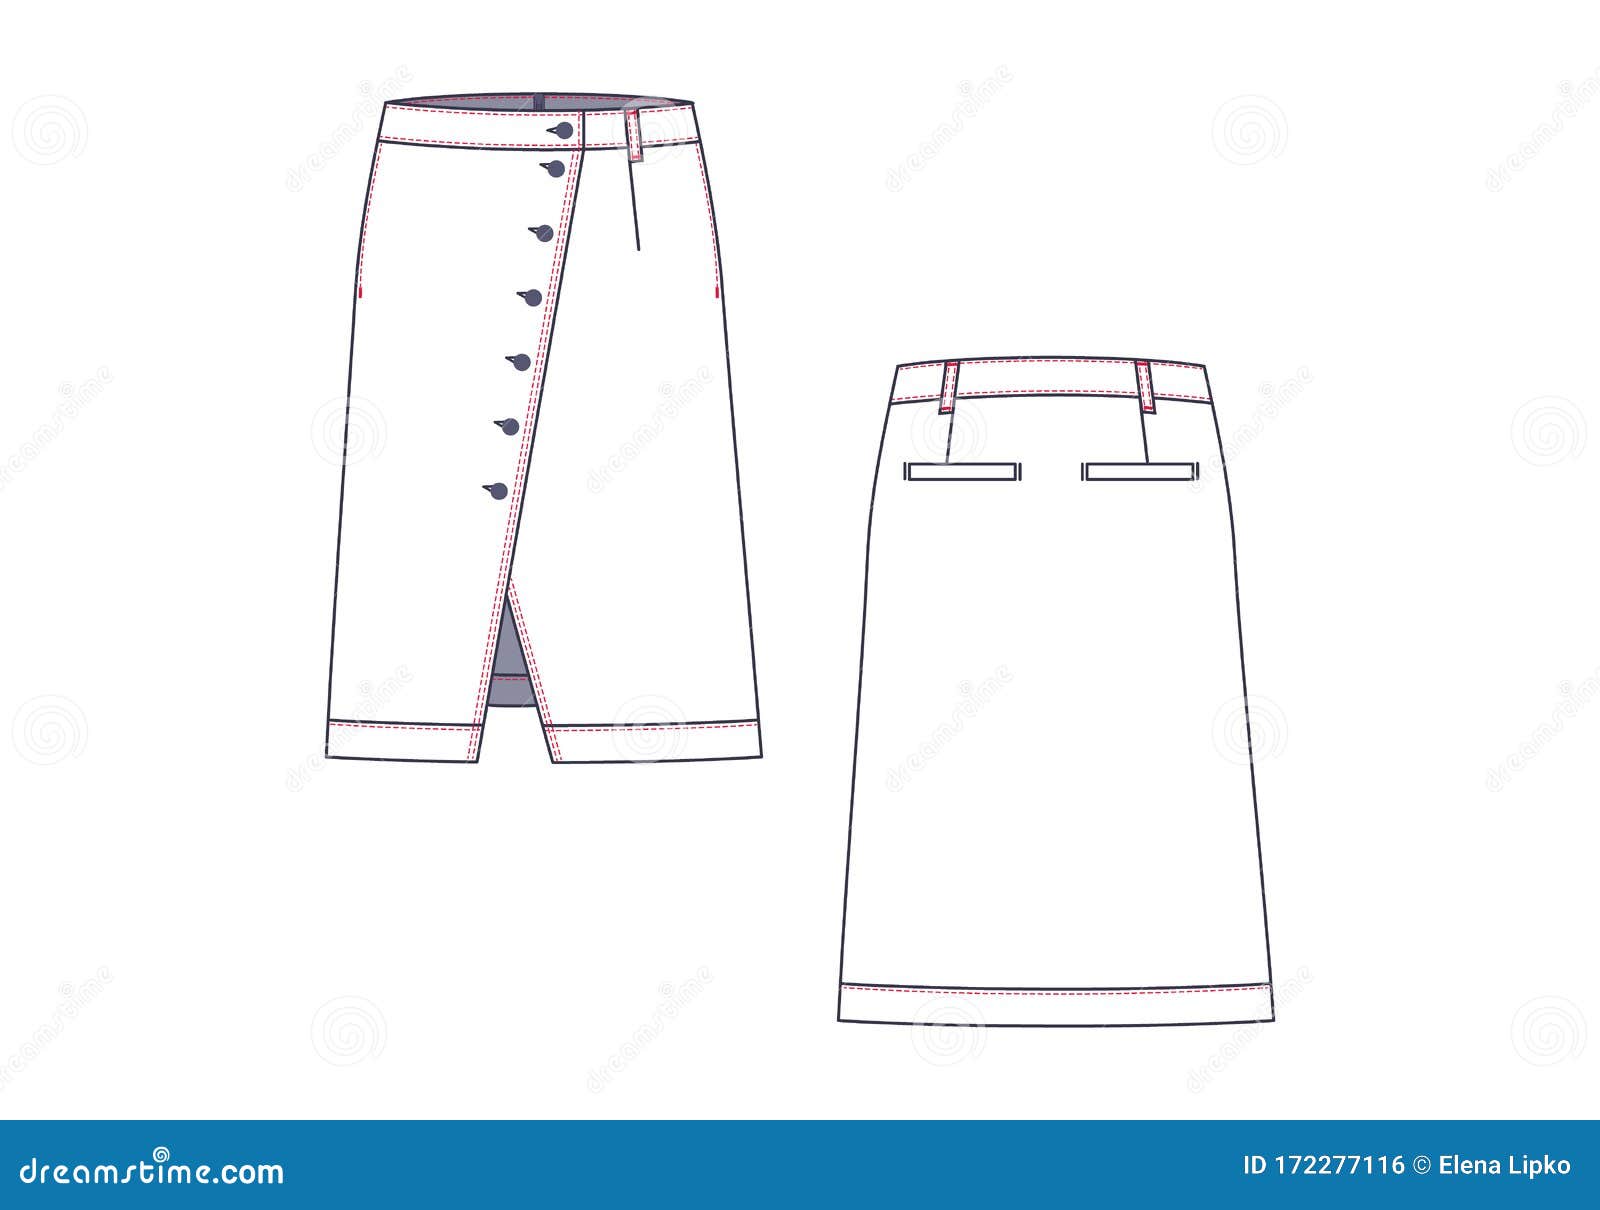 Female Cut Out Denim Skirt Vector Template Isolated on a White ...